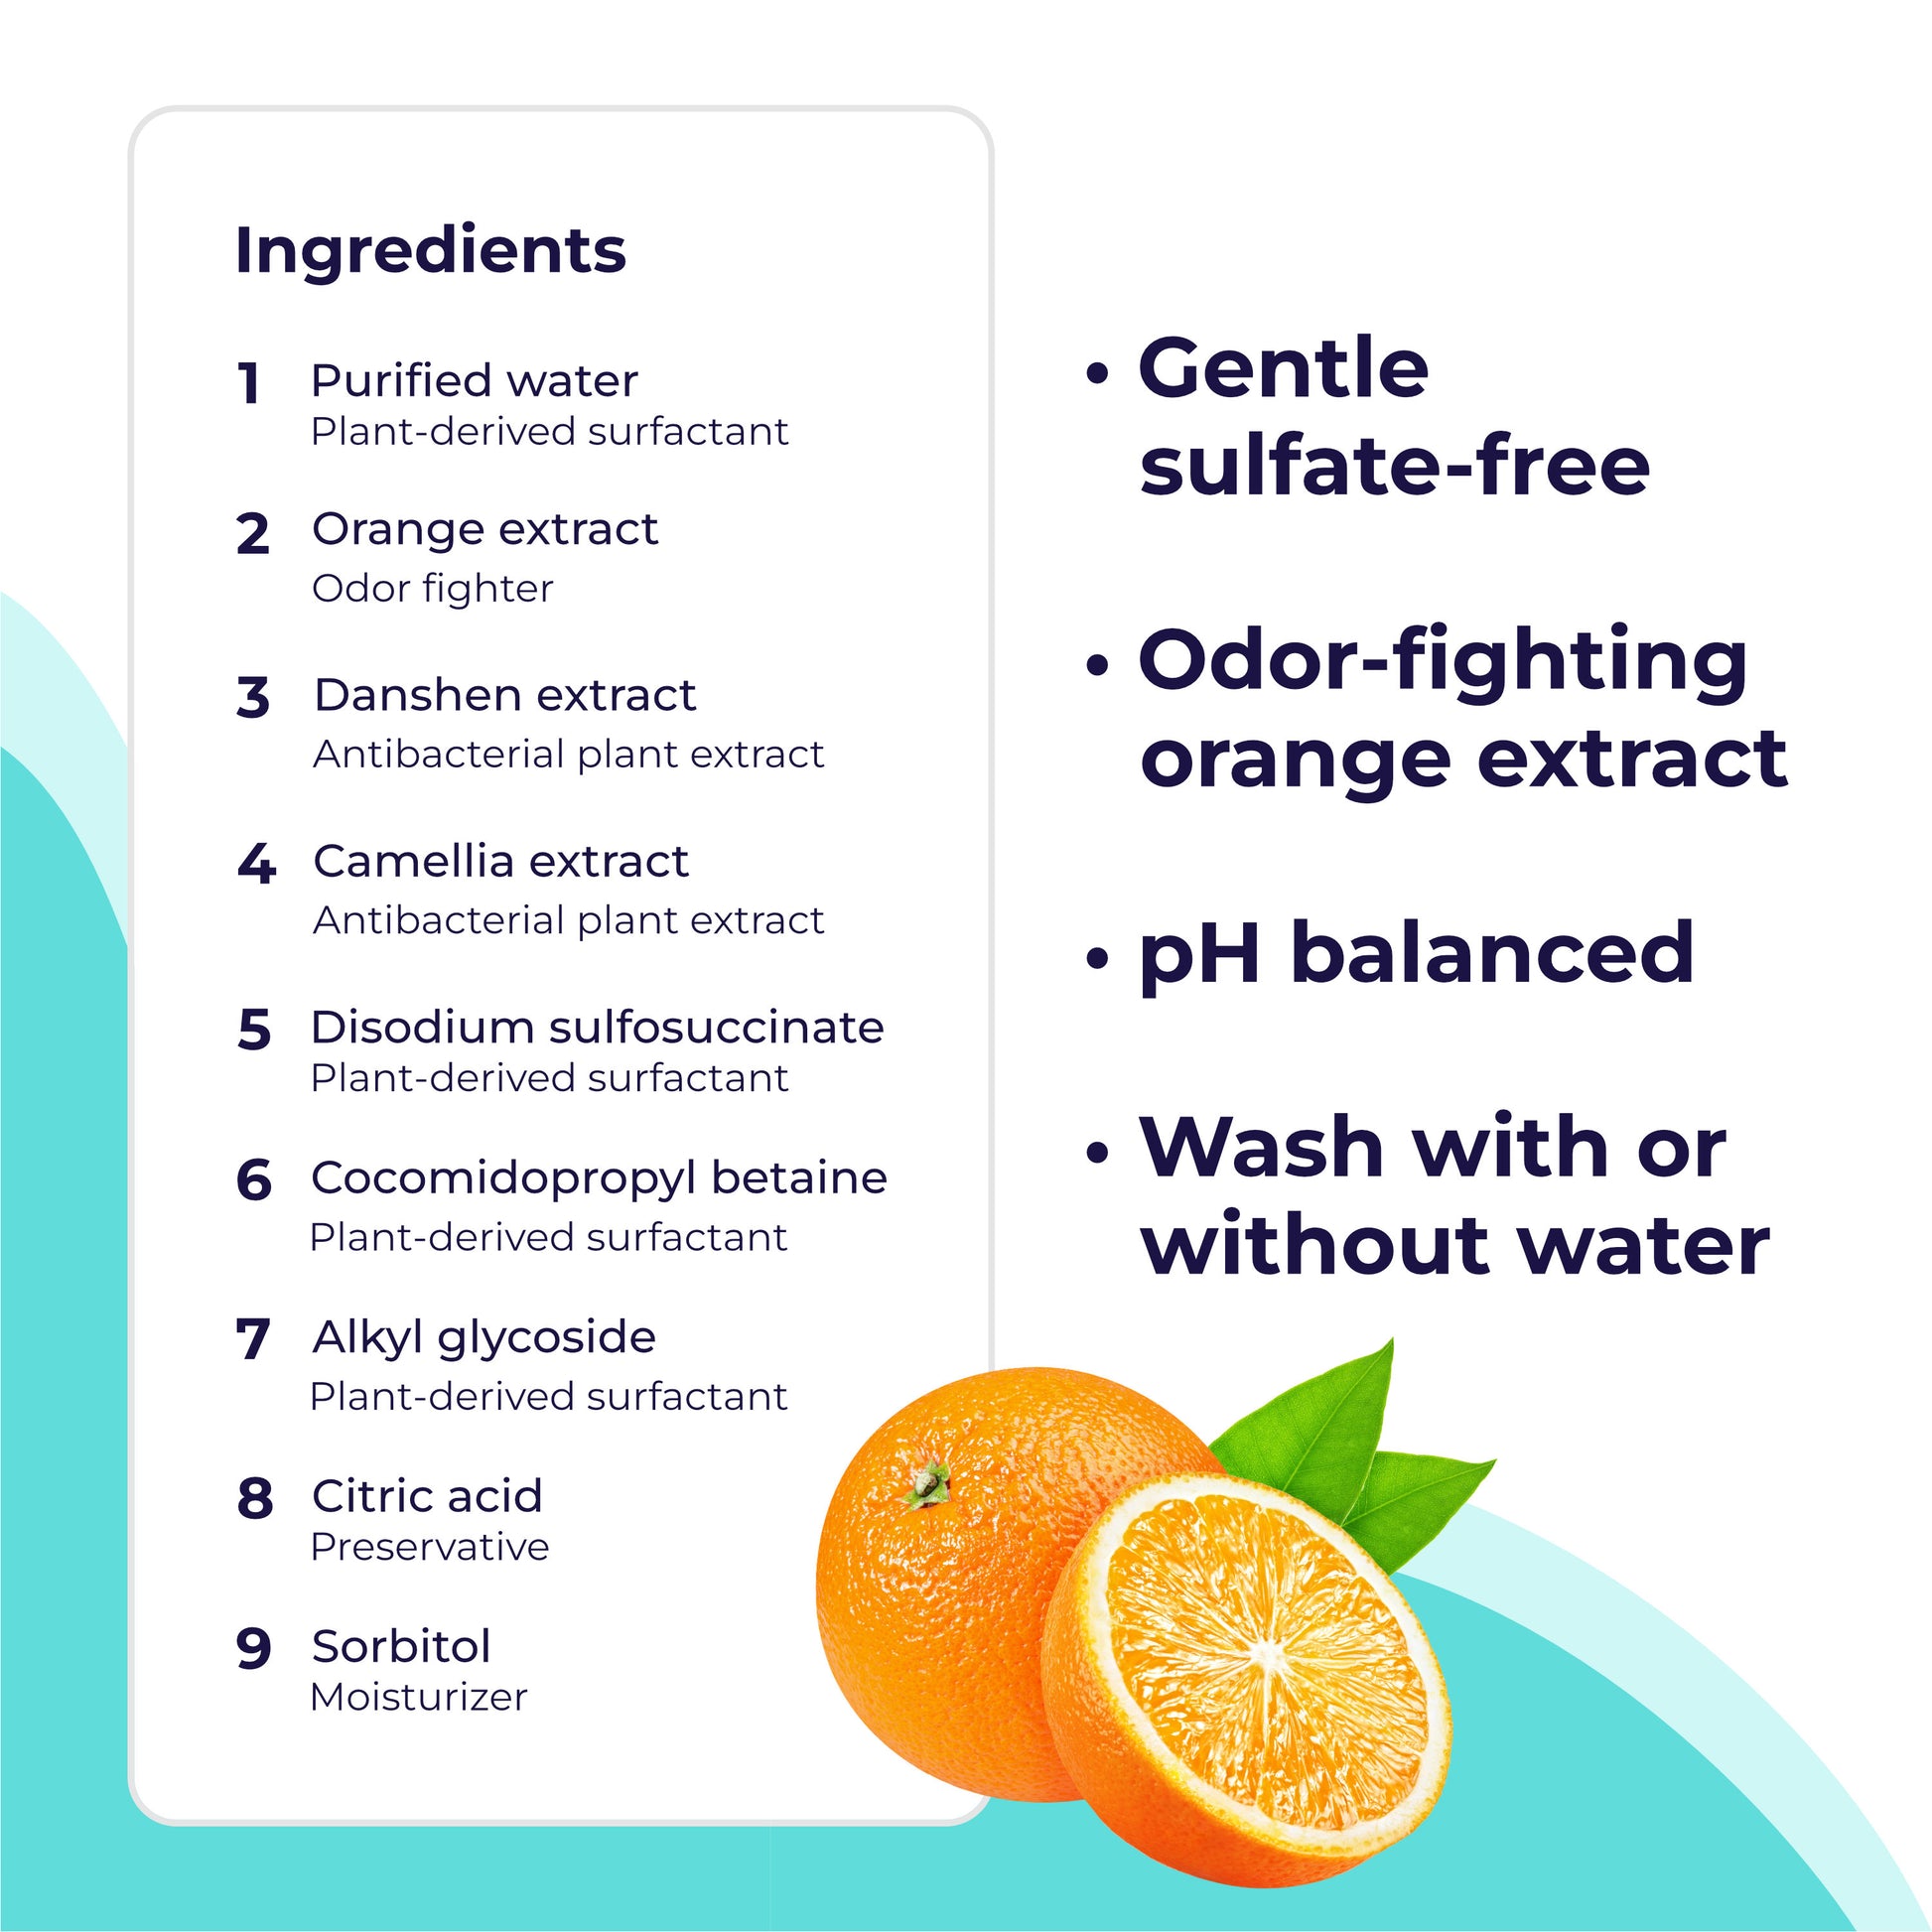 Gentle, sulfate-free - Odor fighting orange extract - pH balanced - Wash with or without water